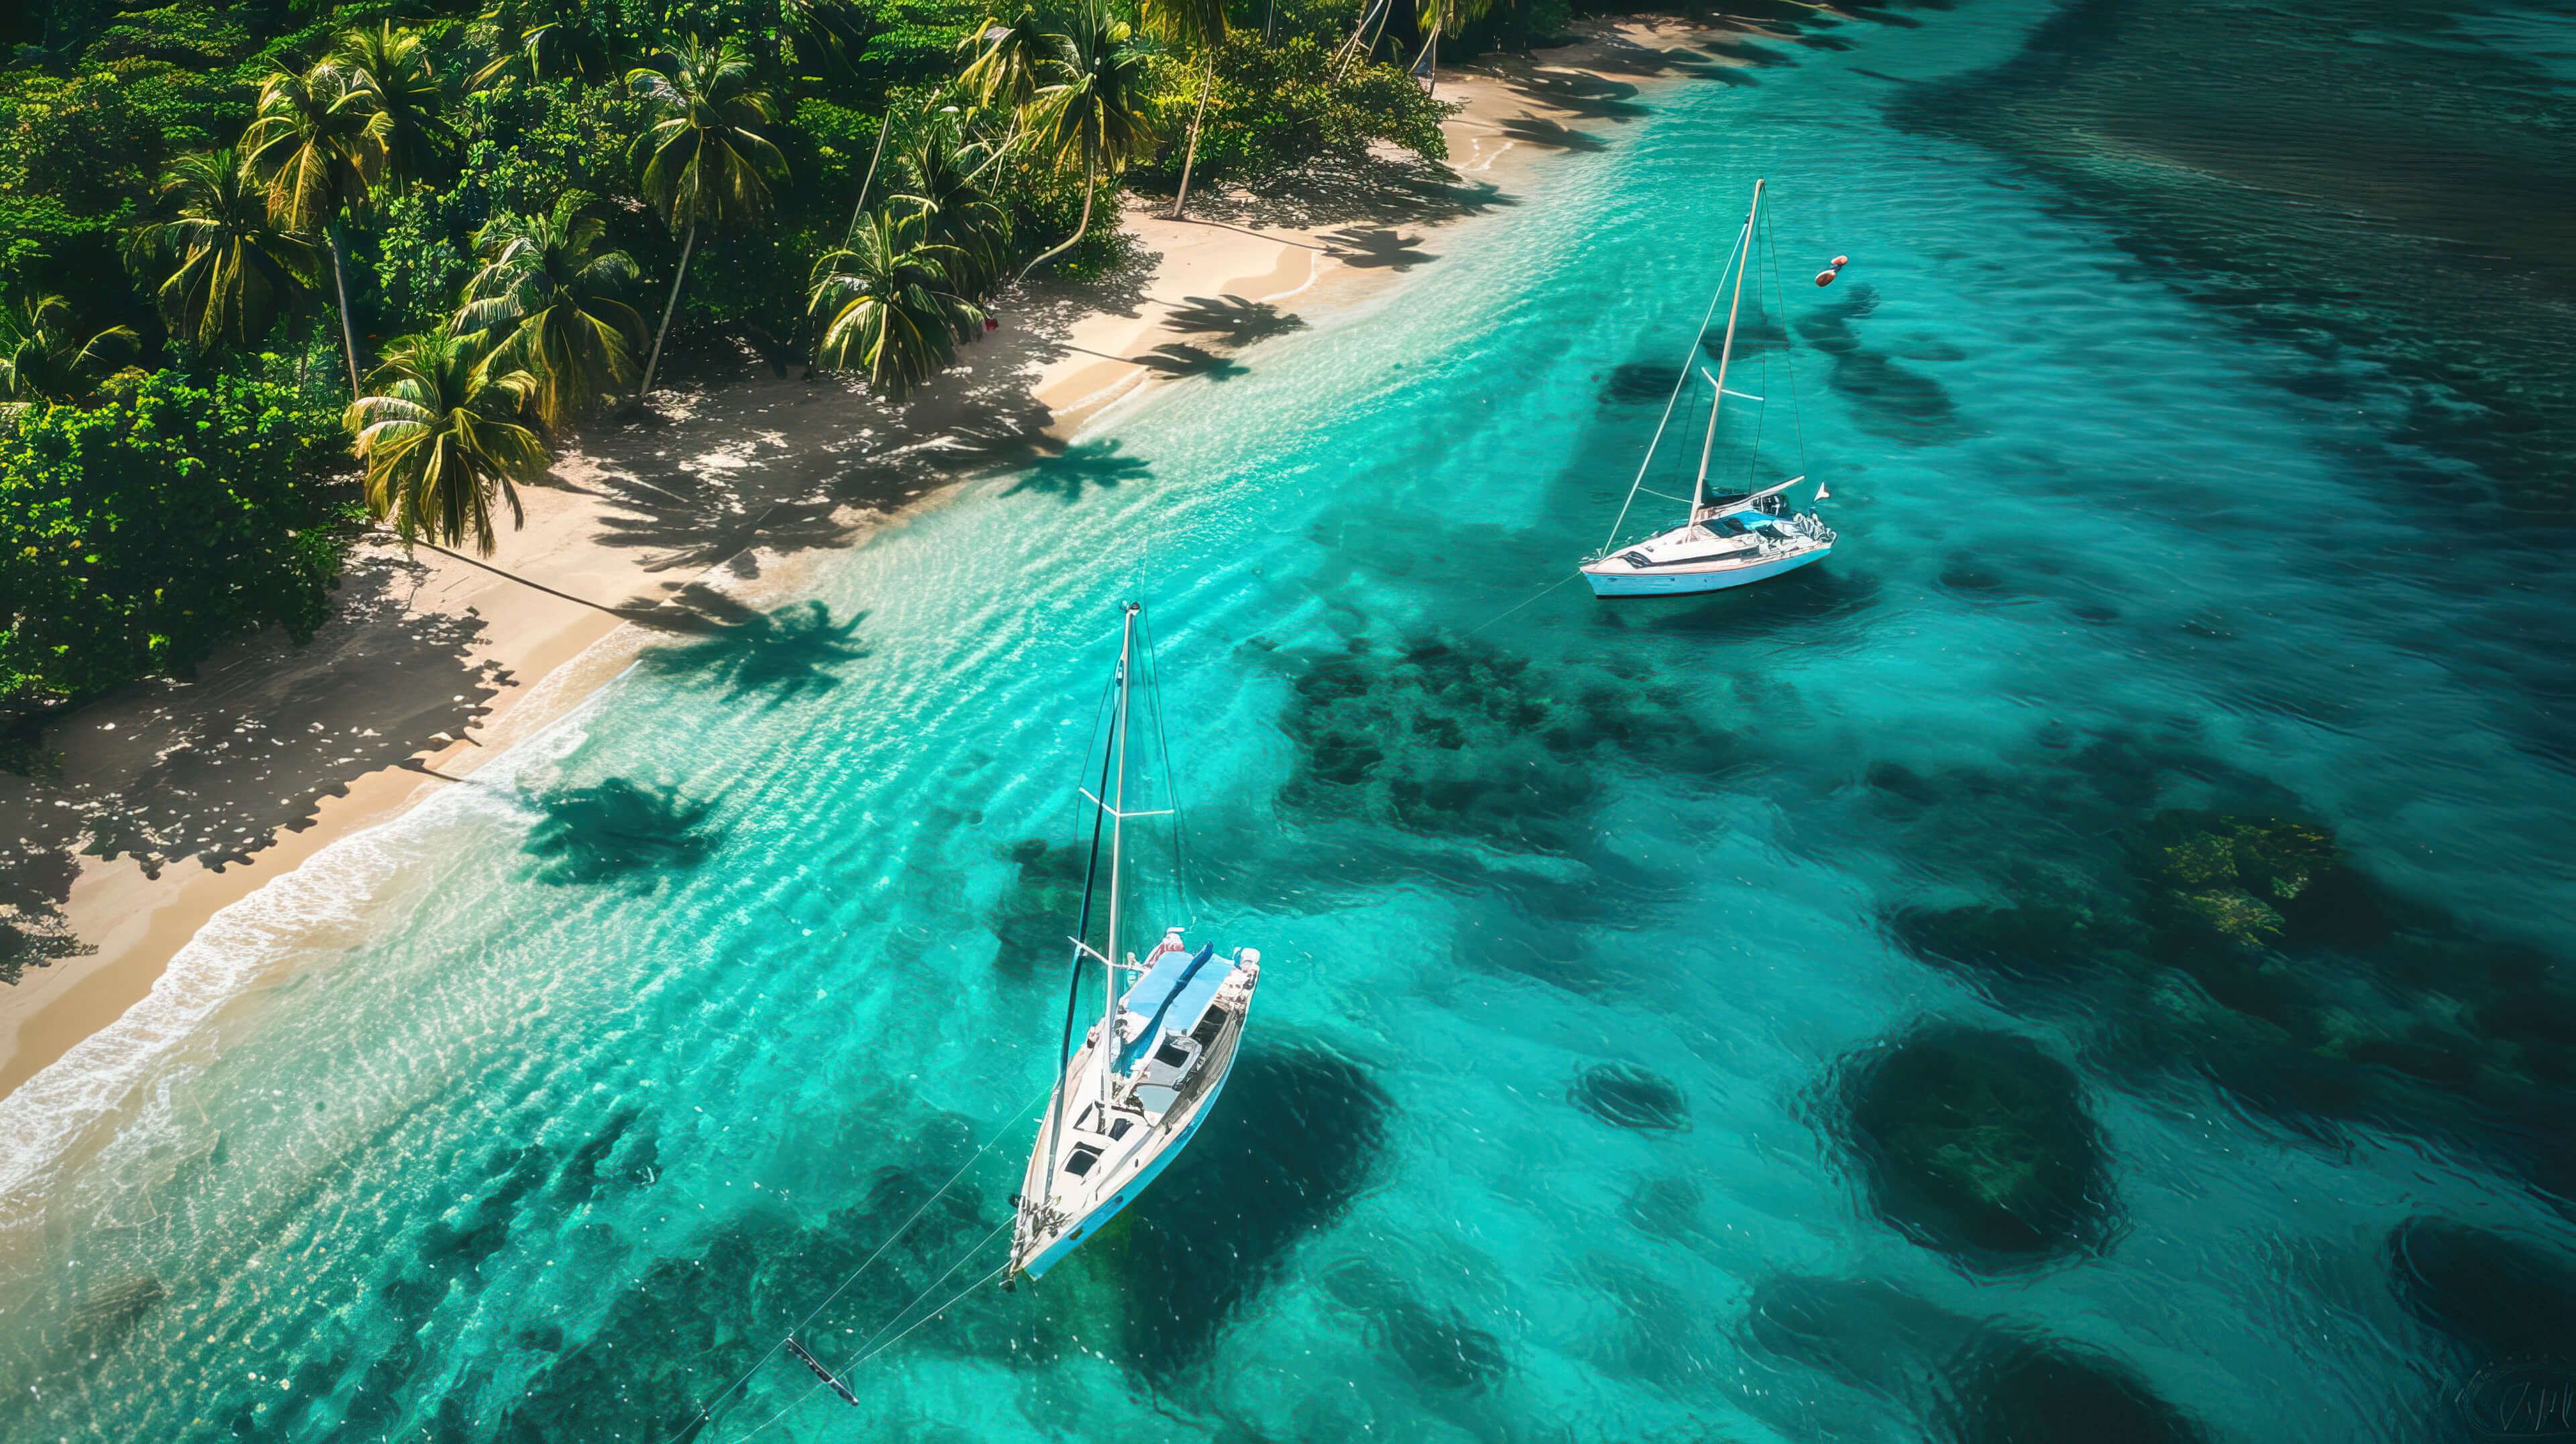 An idyllic tropical paradise with palm fringed beaches and sailboats anchored in crystal clear turquoise waters, inviting viewers to escape to paradise